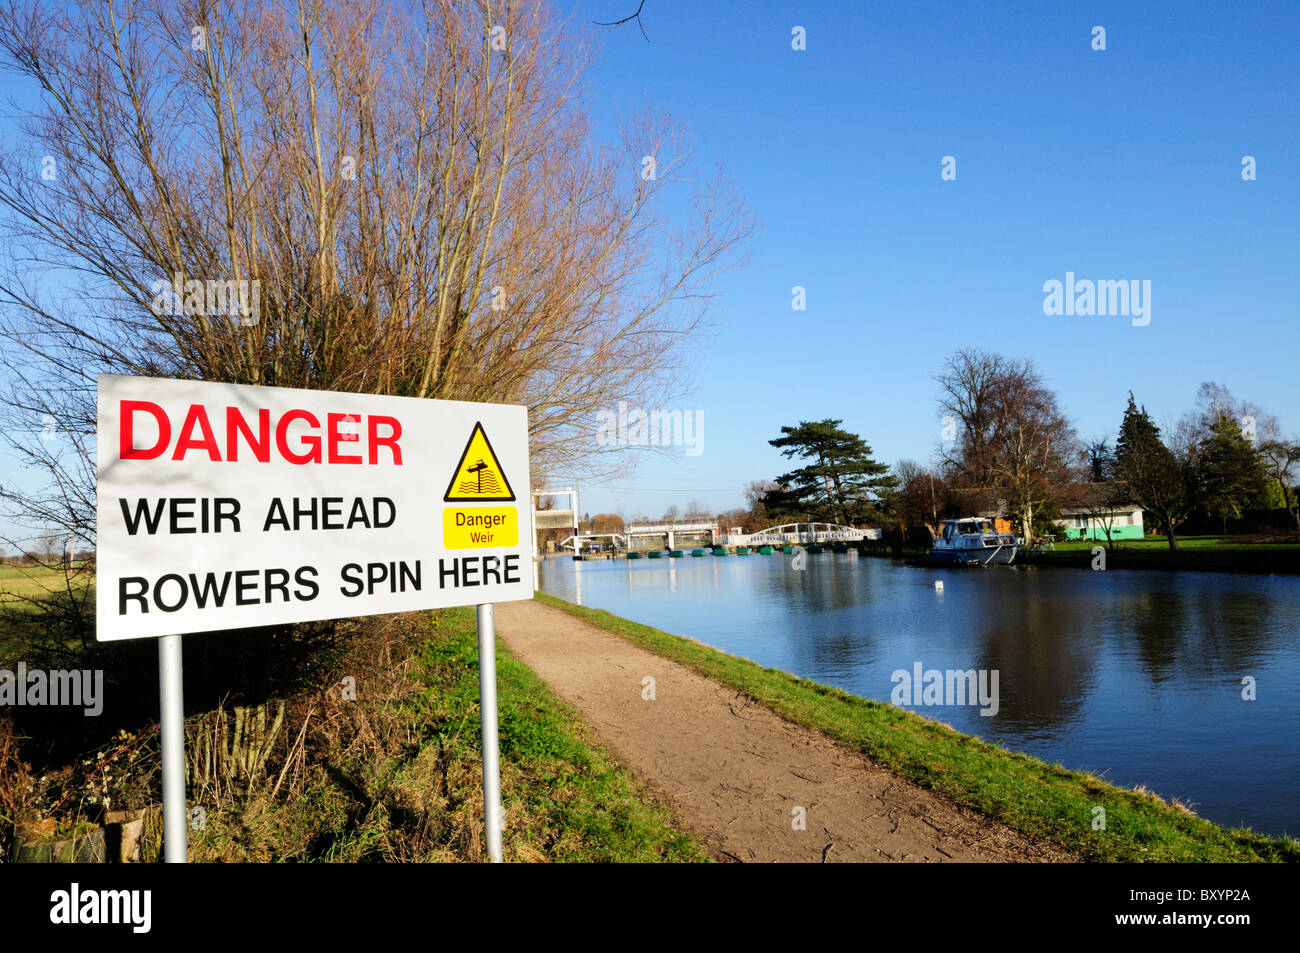 Danger Weir Ahead Rowers Spin here warning sign, Baitsbite Lock on the River Cam at Milton, Cambridge, England, UK Stock Photo